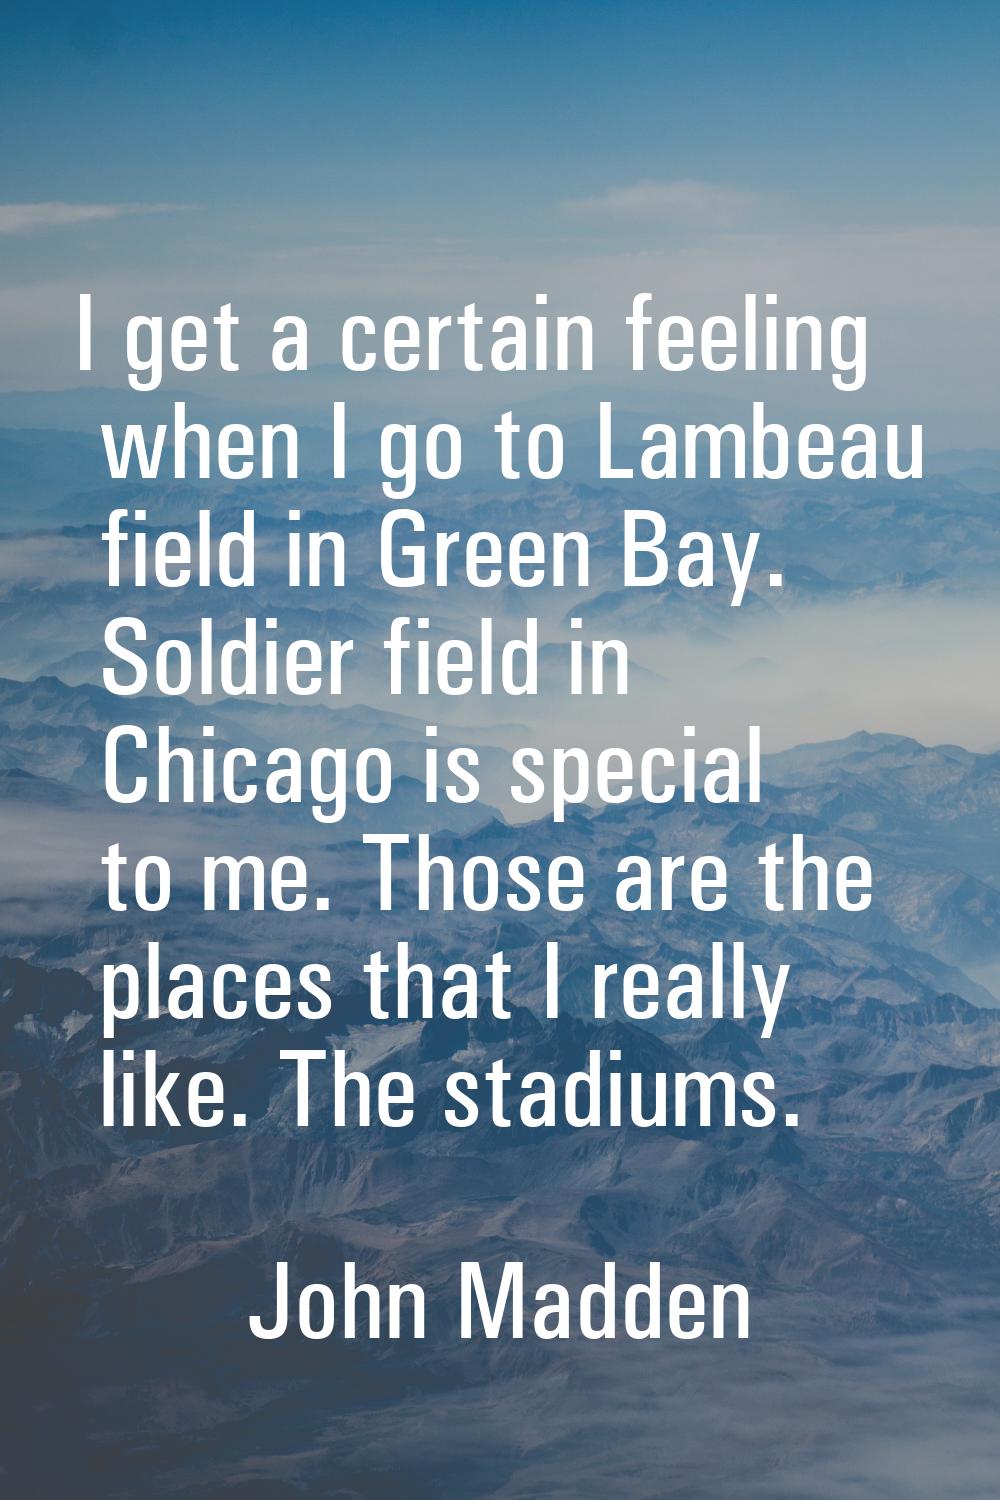 I get a certain feeling when I go to Lambeau field in Green Bay. Soldier field in Chicago is specia